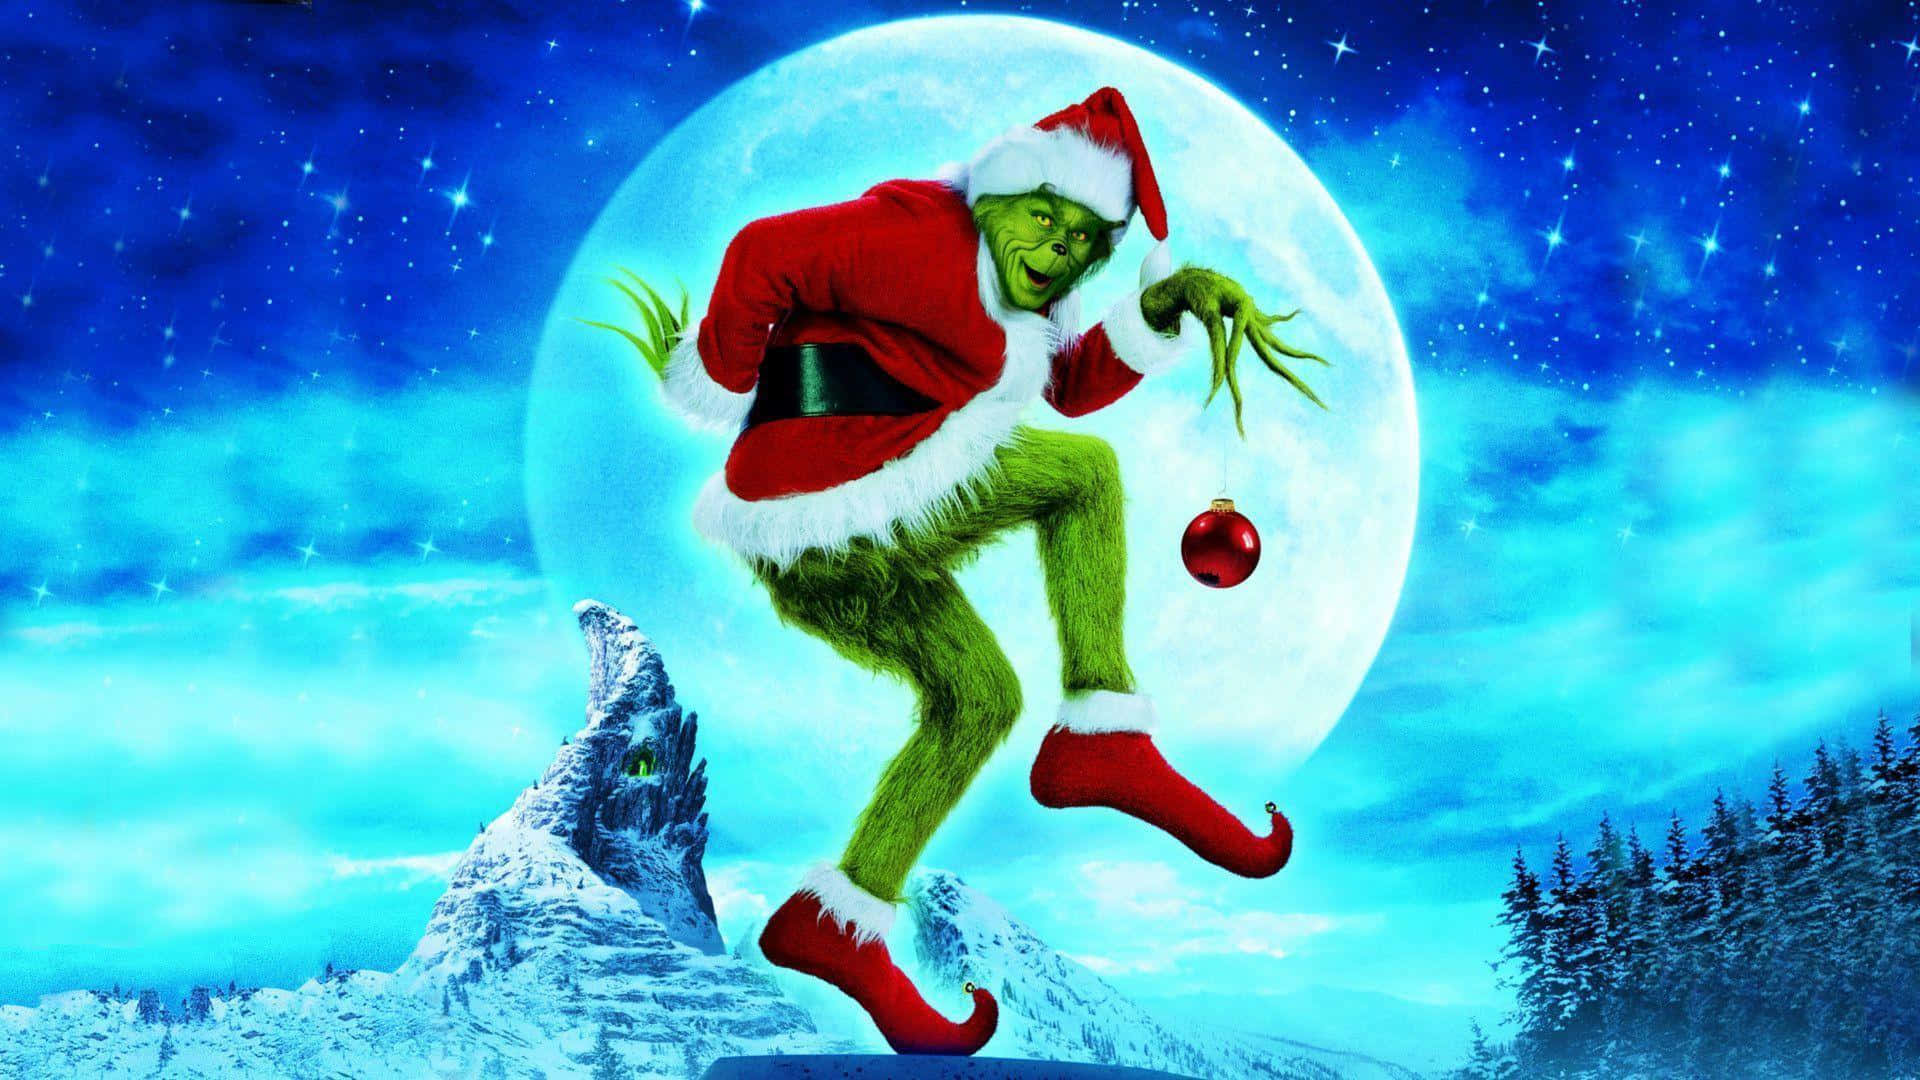 The Grinch stealing Whoville's Christmas!